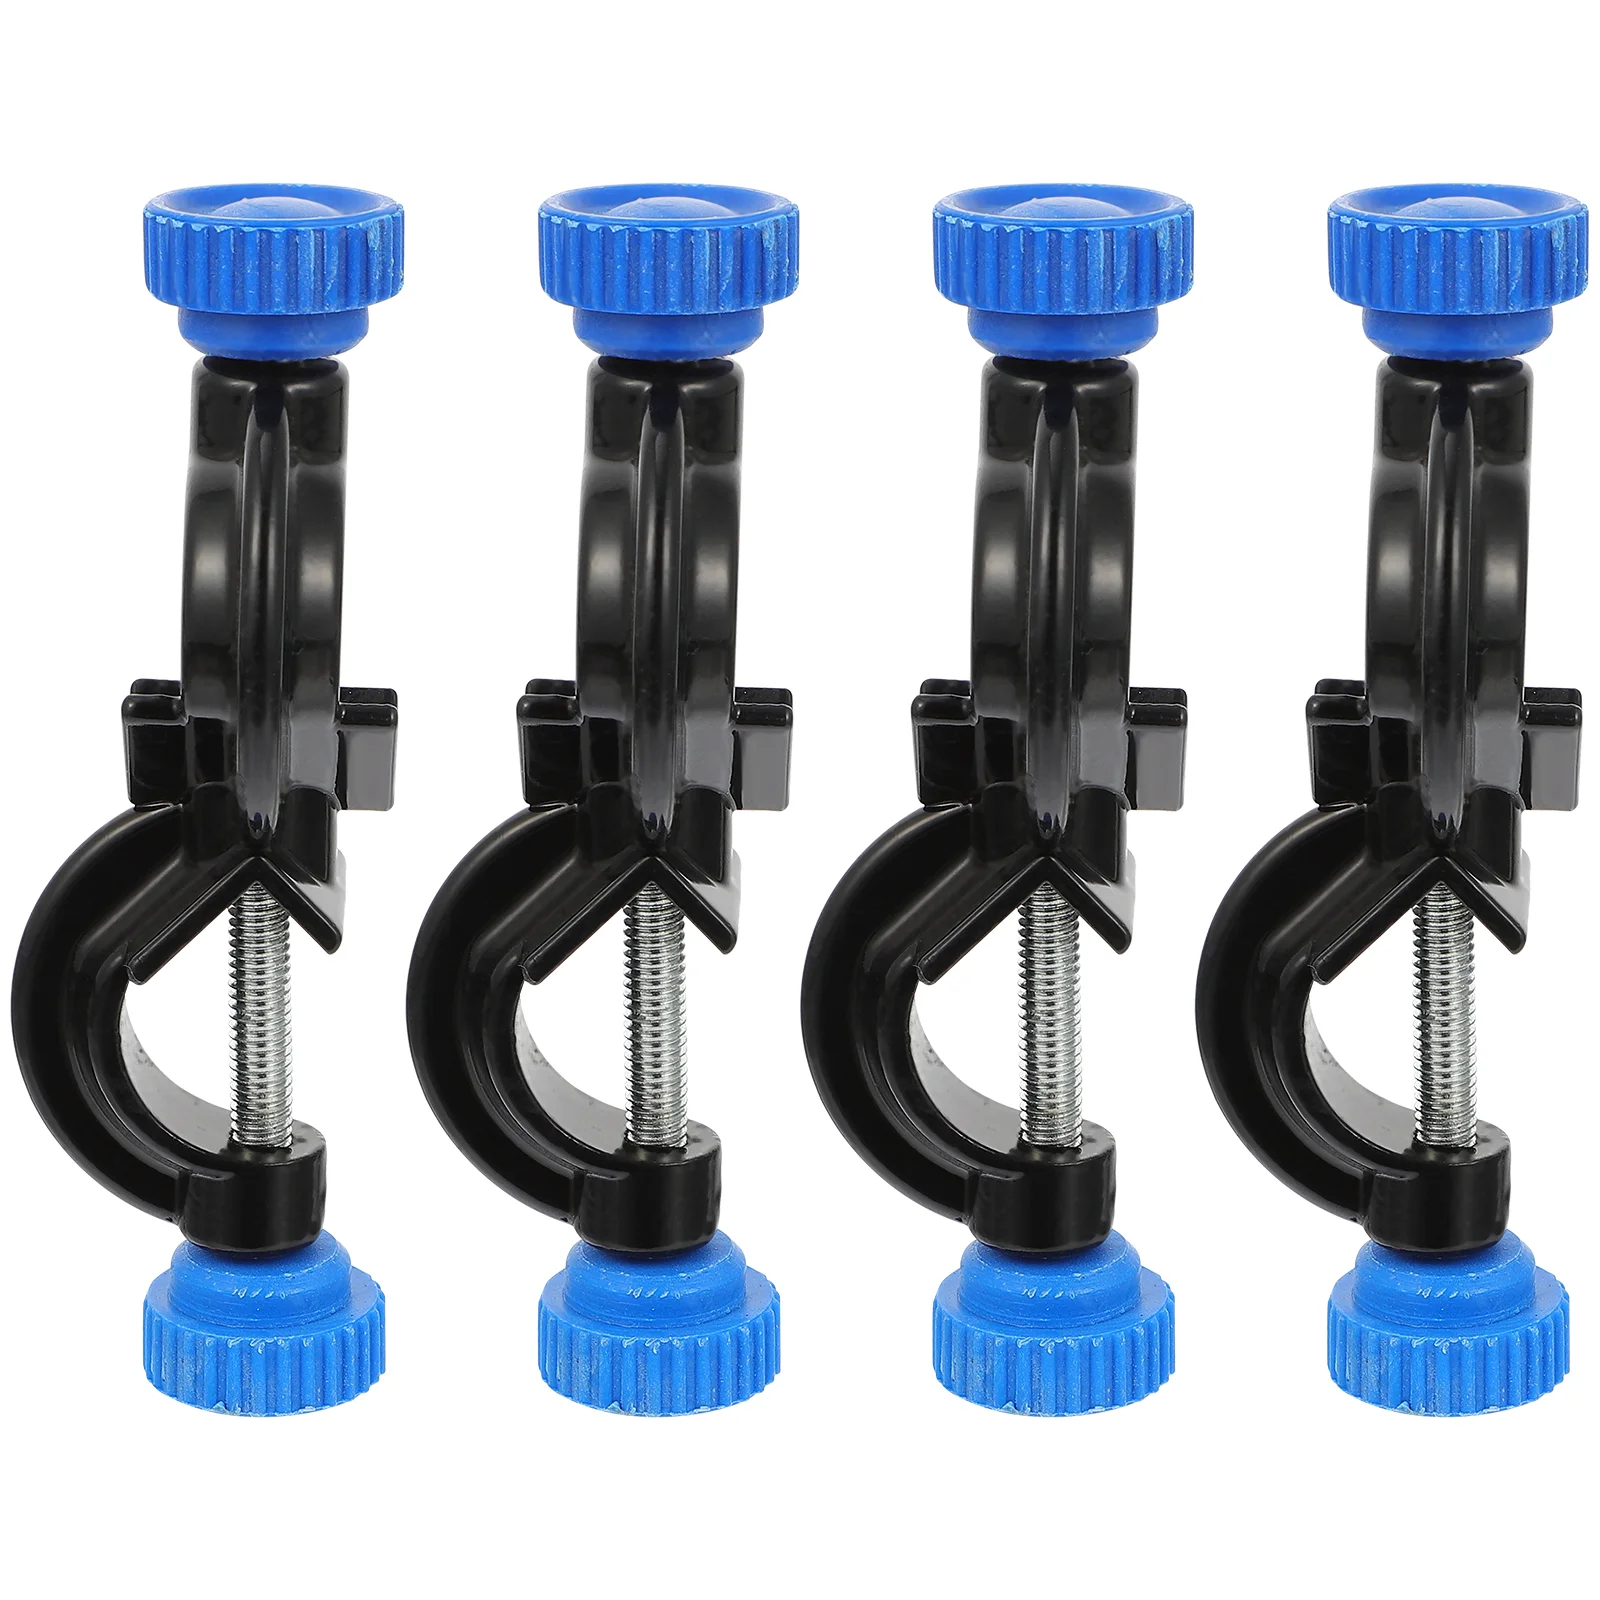 

4 Pcs Iron Stand Accessories Black Clips Boss Head Clamp Right Angle Aluminum Cross Laboratory Supplies